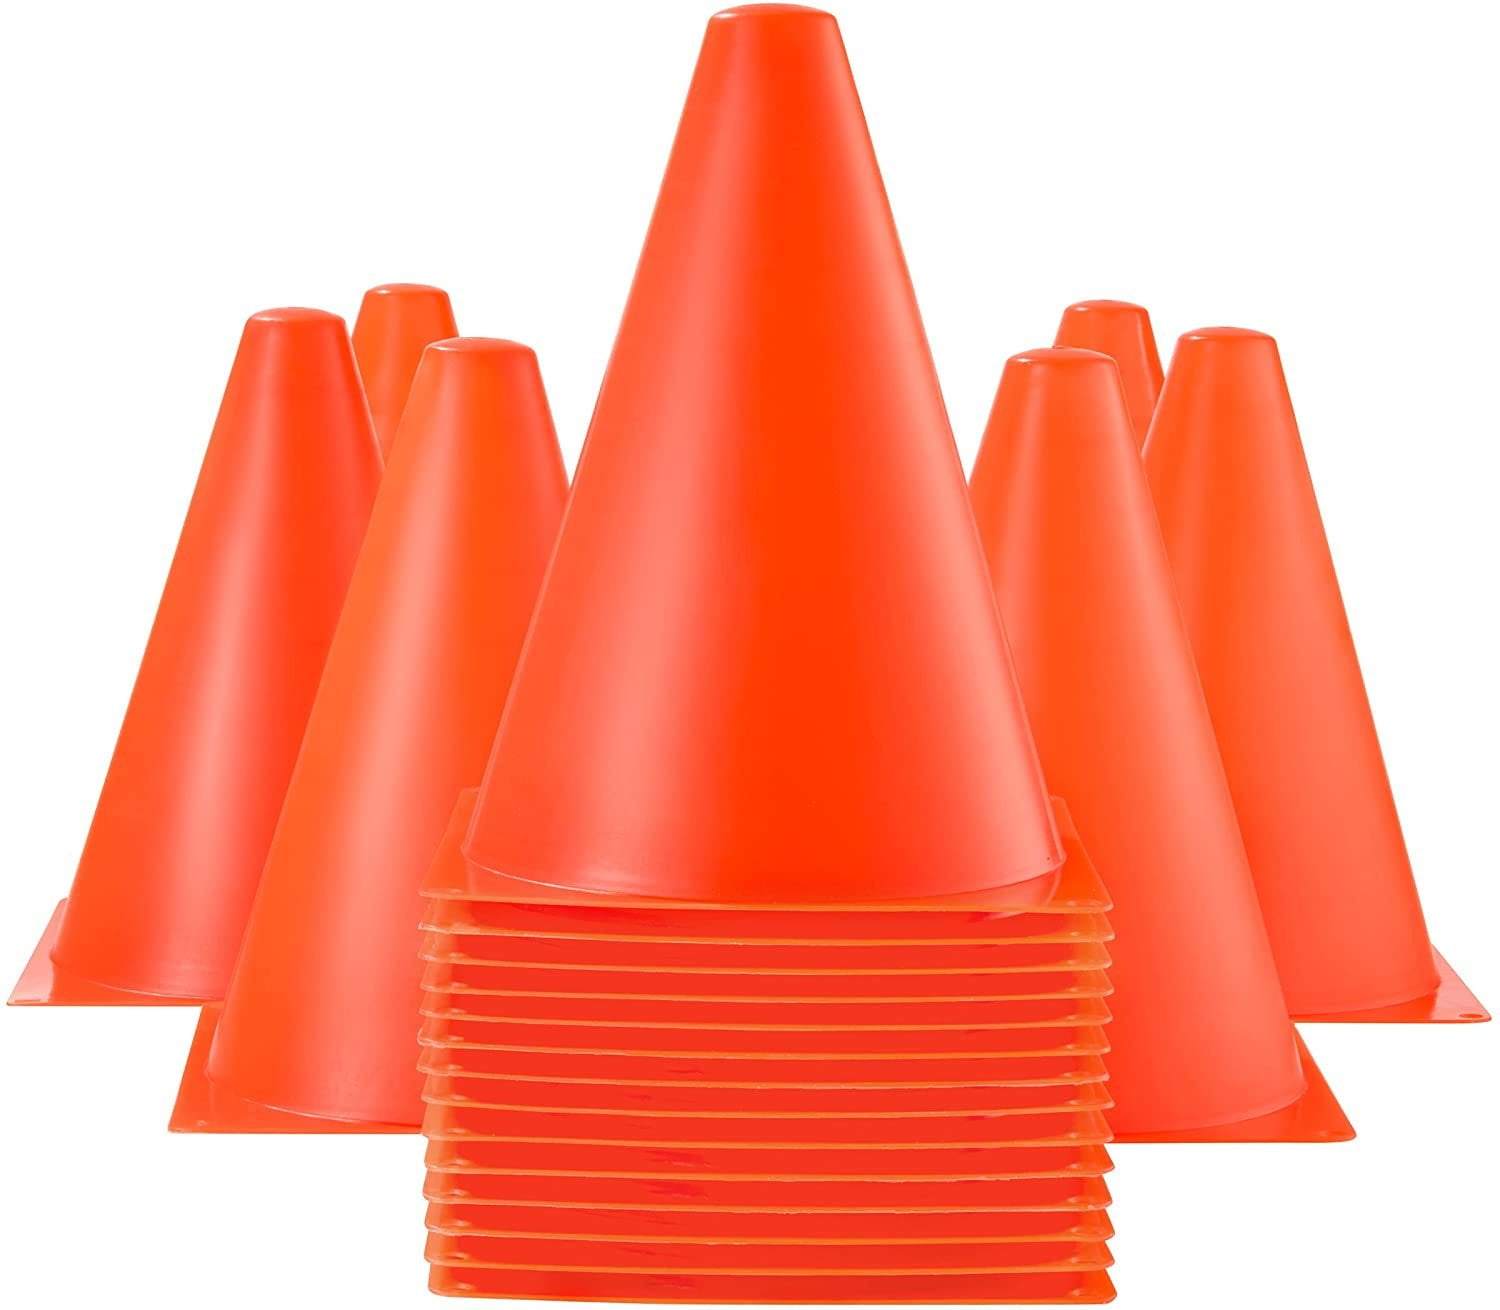 100 20 60 9" Tall Yellow CONES Sports Training Safety Cone Quantity 10 40 